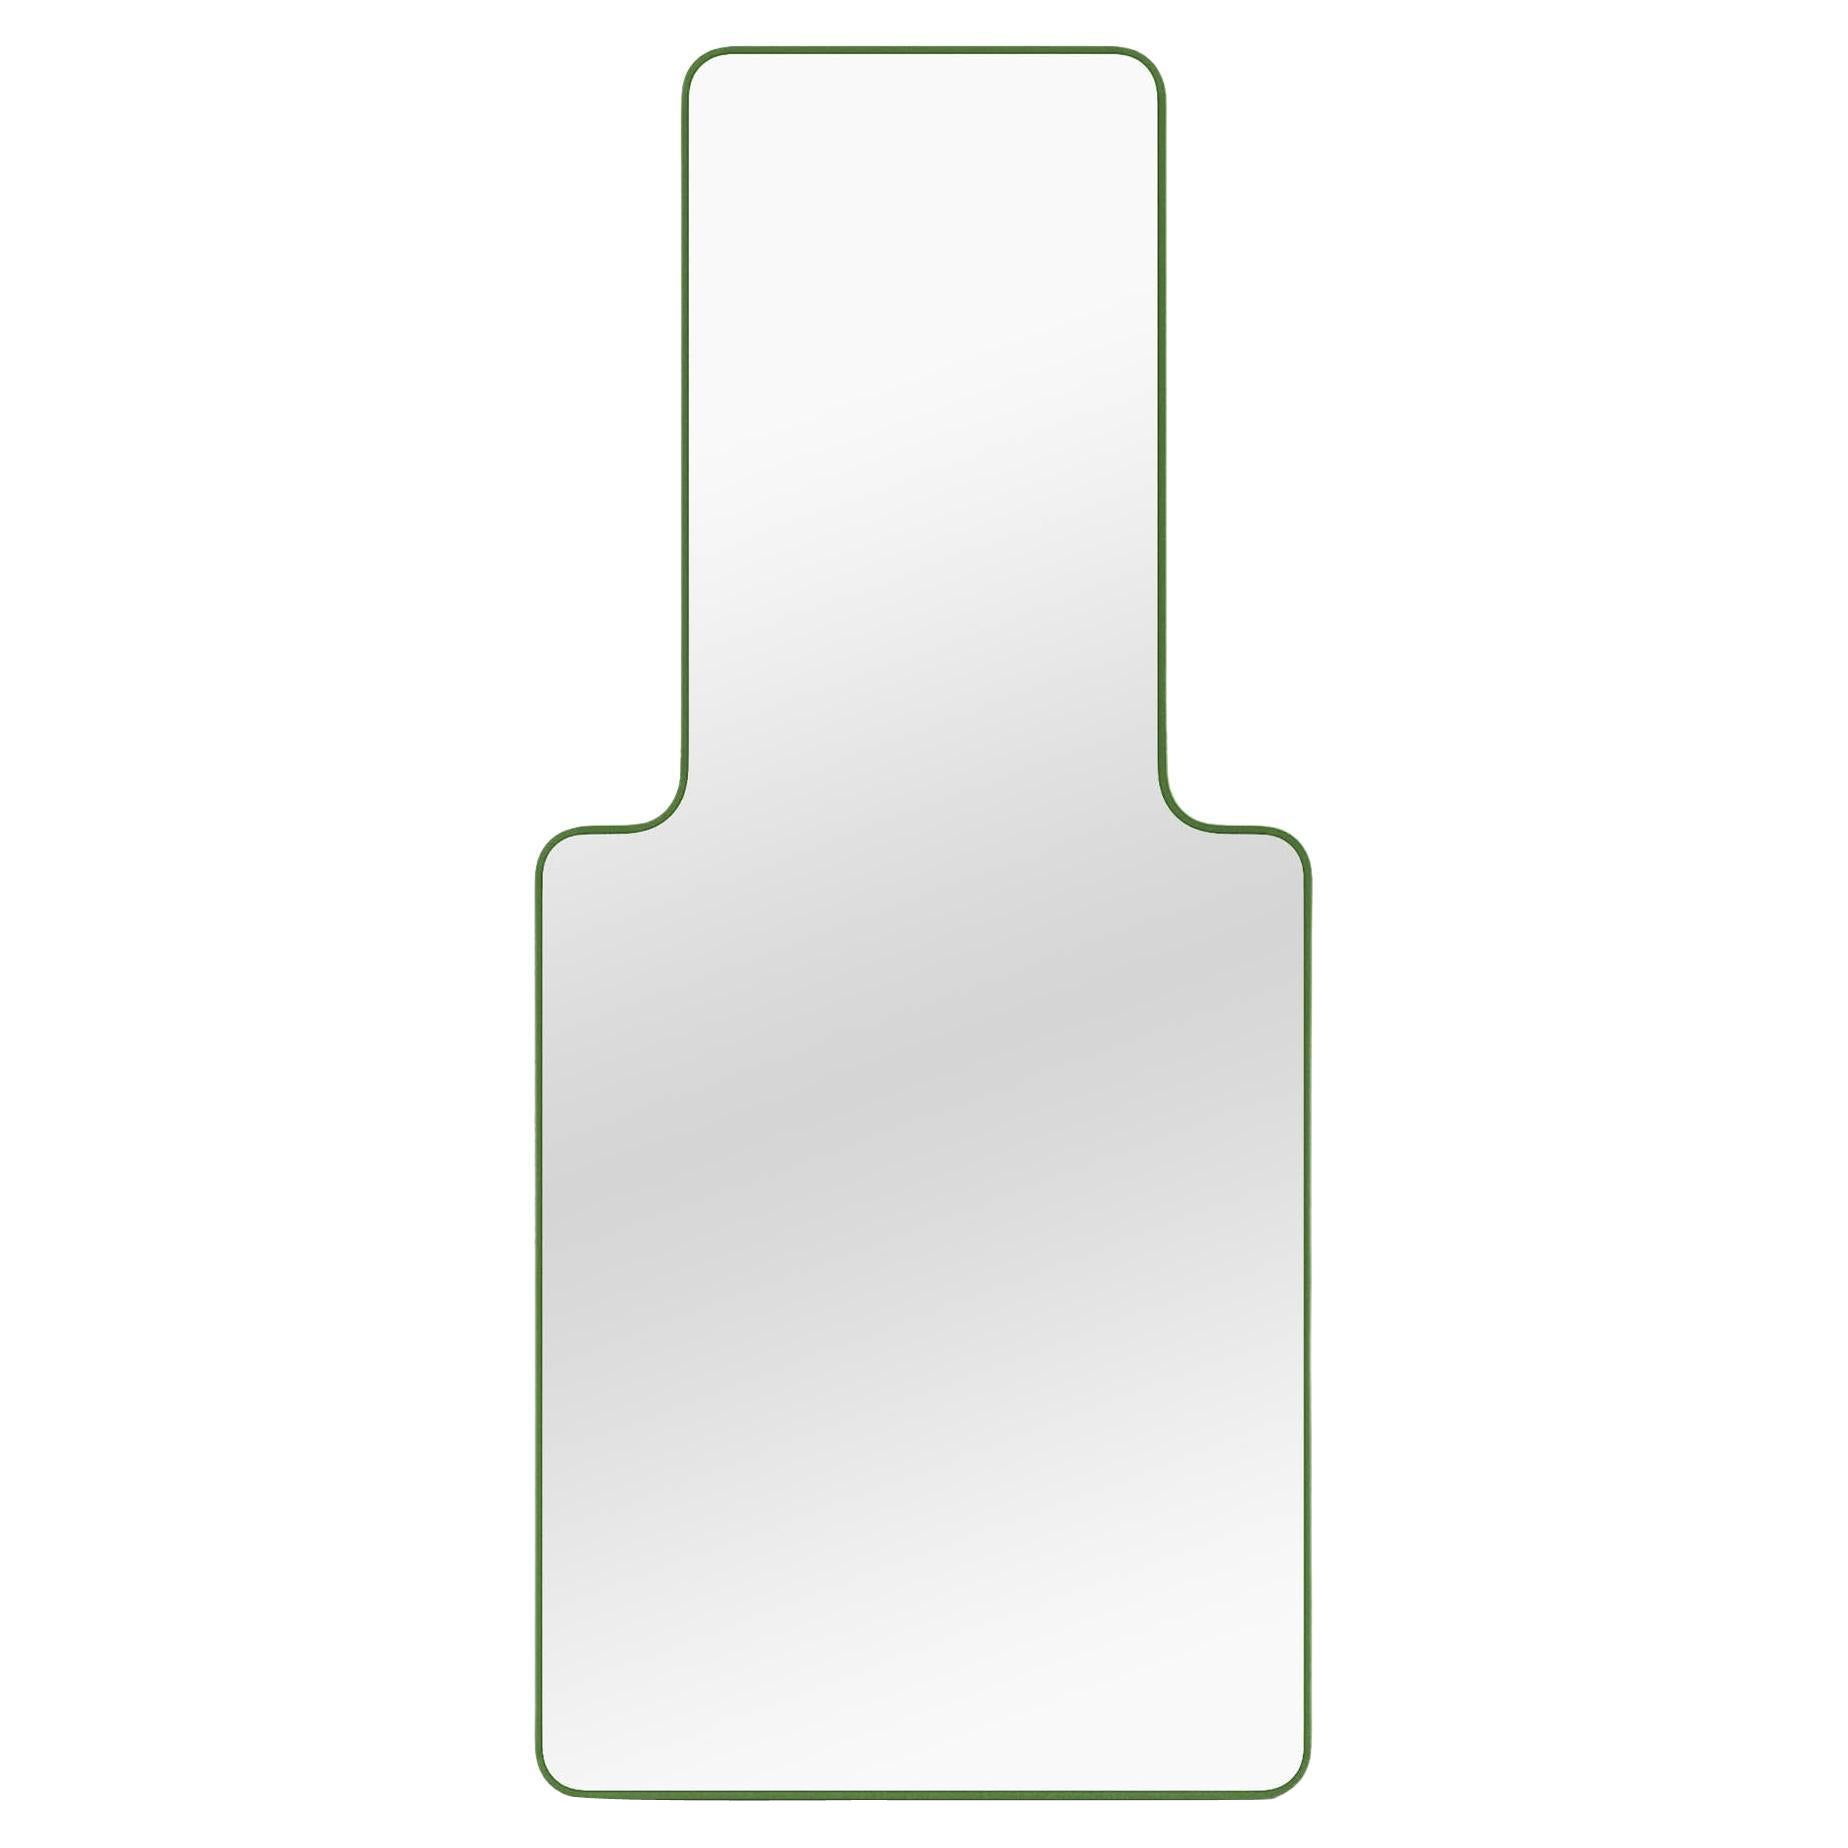 Contemporary Mirror 'Loveself 03' by Oitoproducts, Green Frame For Sale